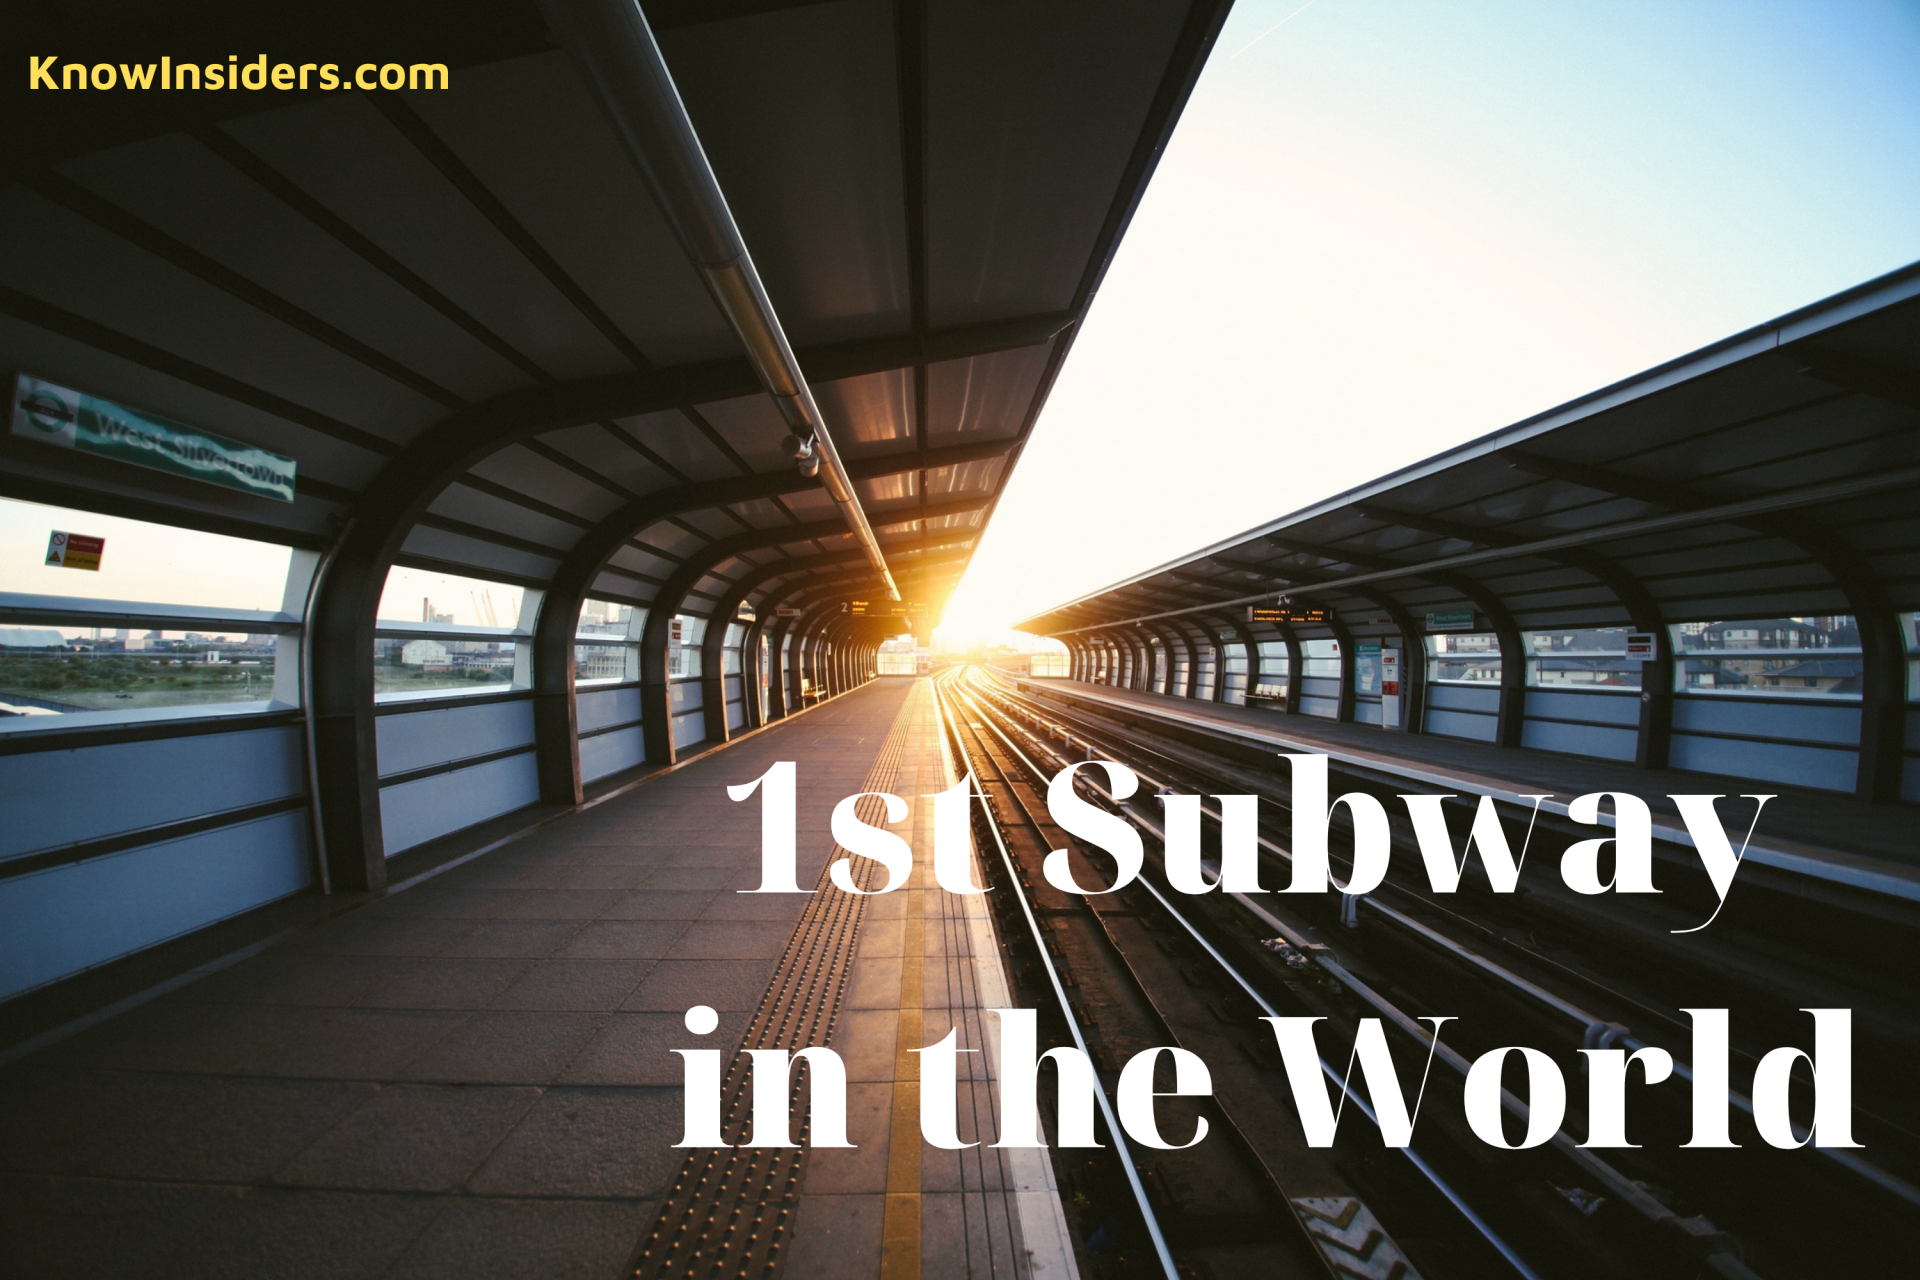 what was the first subway in the world